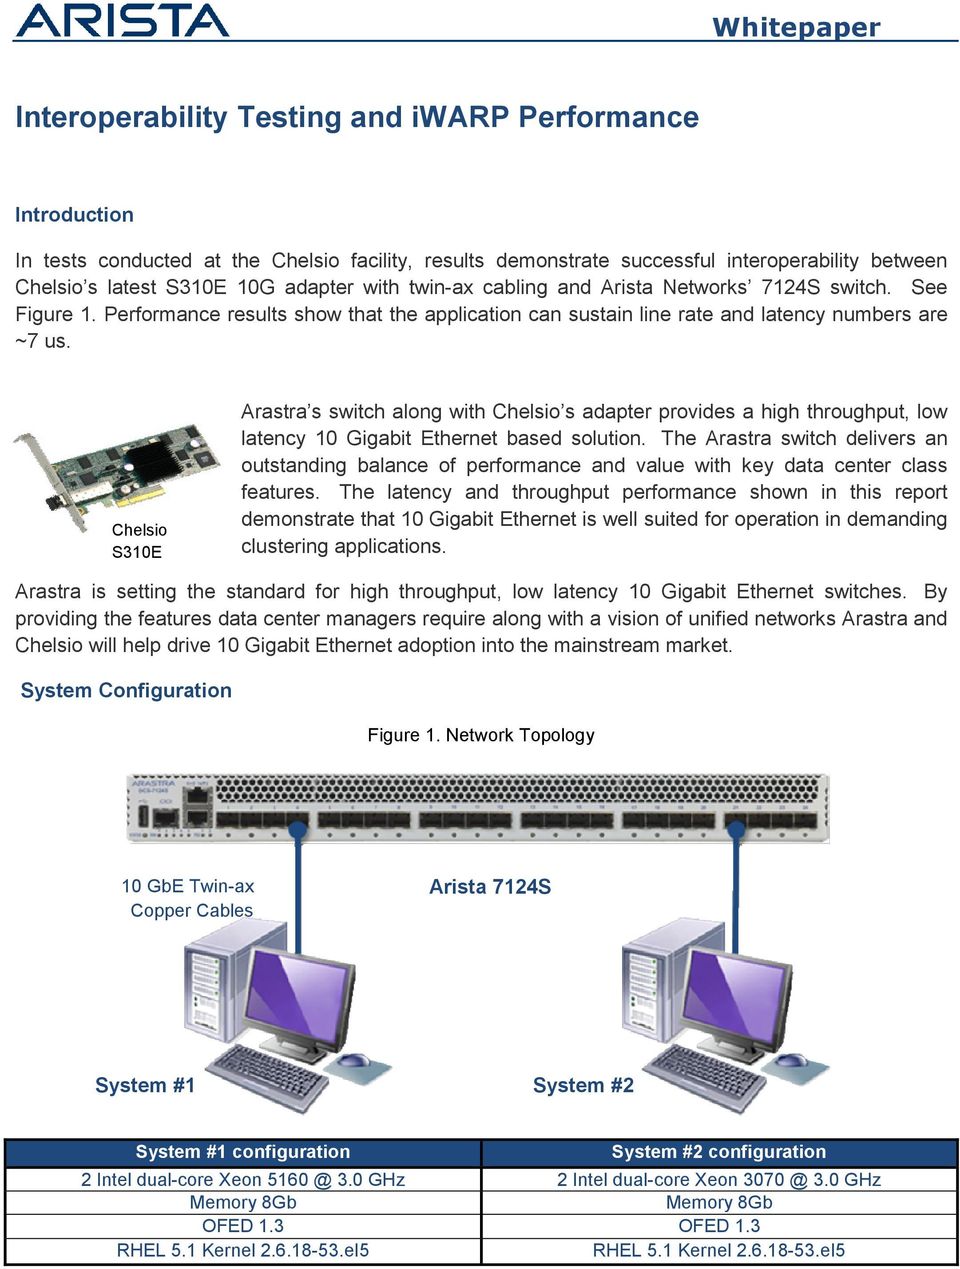 Chelsio S30E Arastra s switch along with Chelsio s adapter provides a high throughput, low latency 0 Gigabit Ethernet based solution.